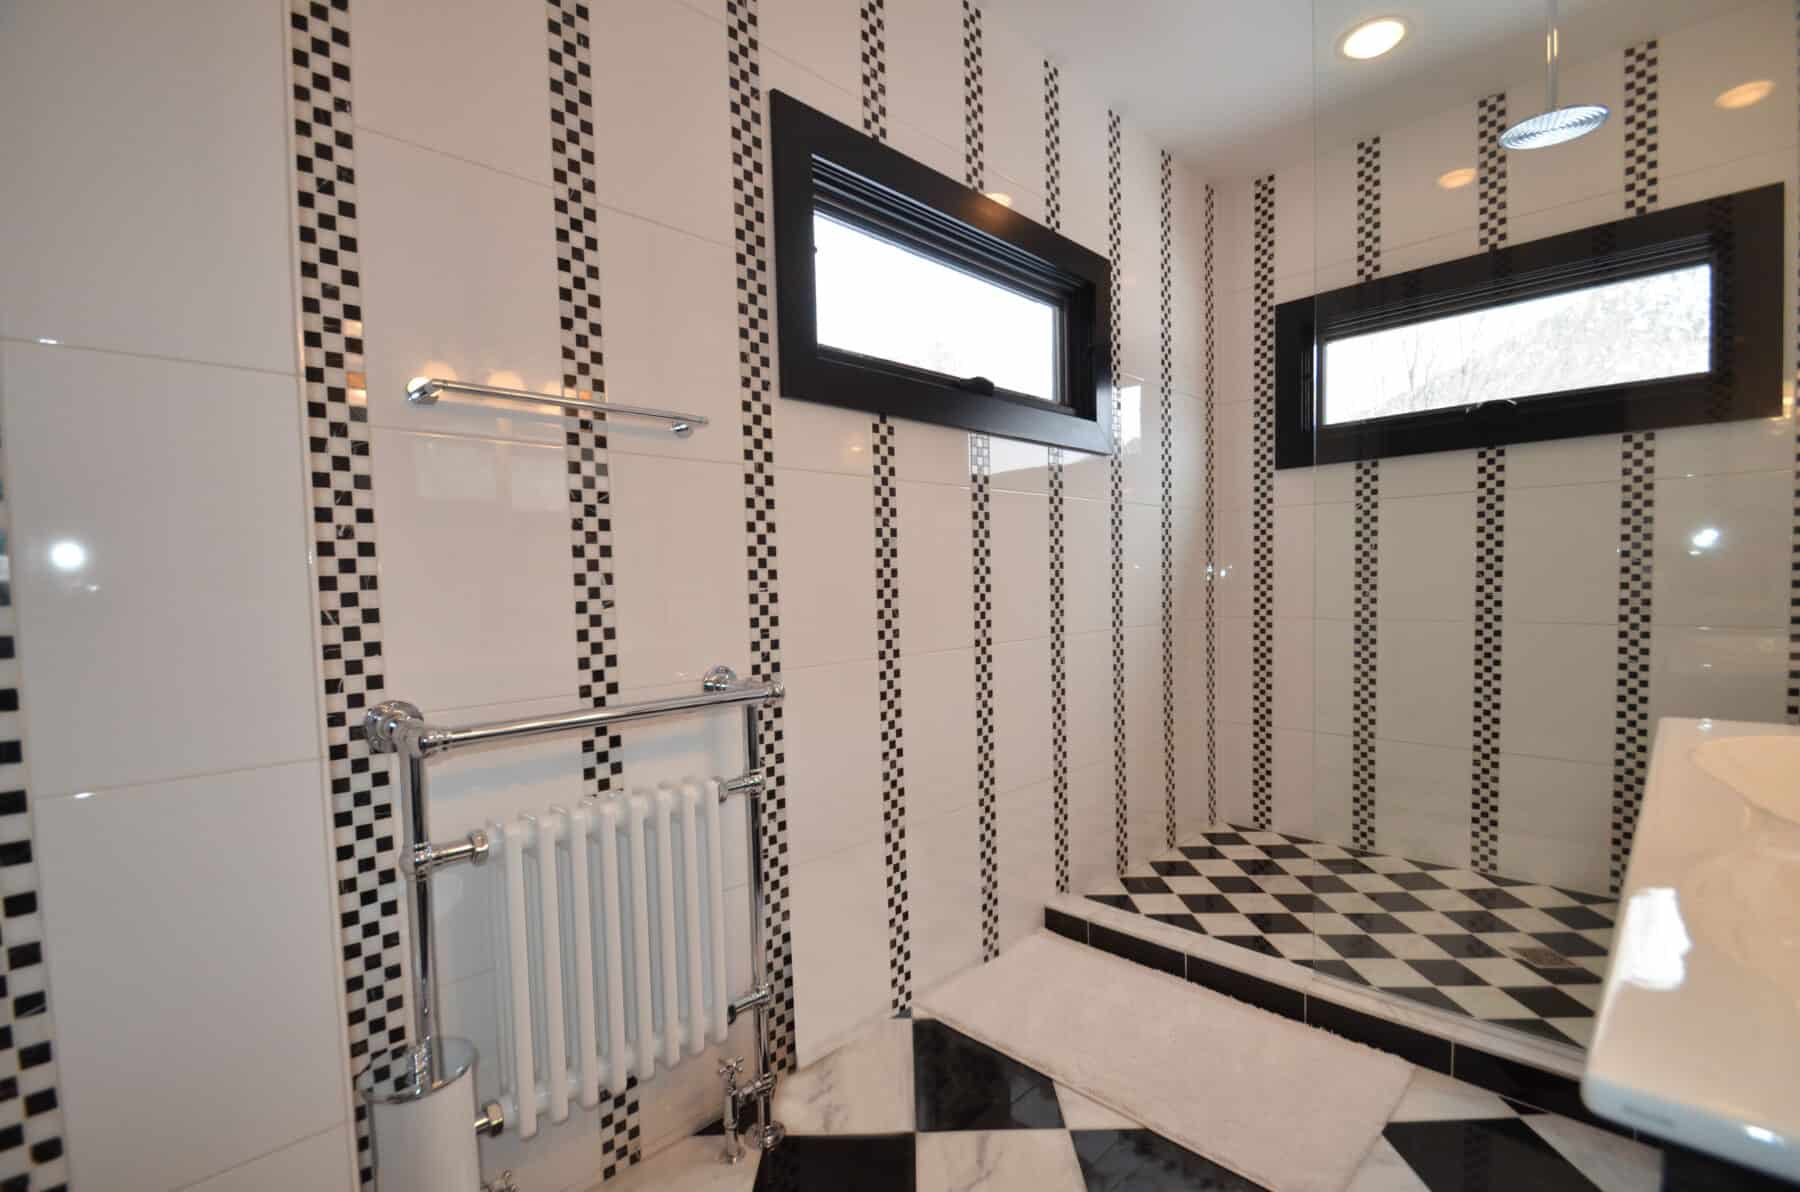 Black and White Modern Checkered Board Pattern Tiled Kids Bathroom with Glass Wall in Aspen, Colorado Custom Home. Luxury Home Building Interiors